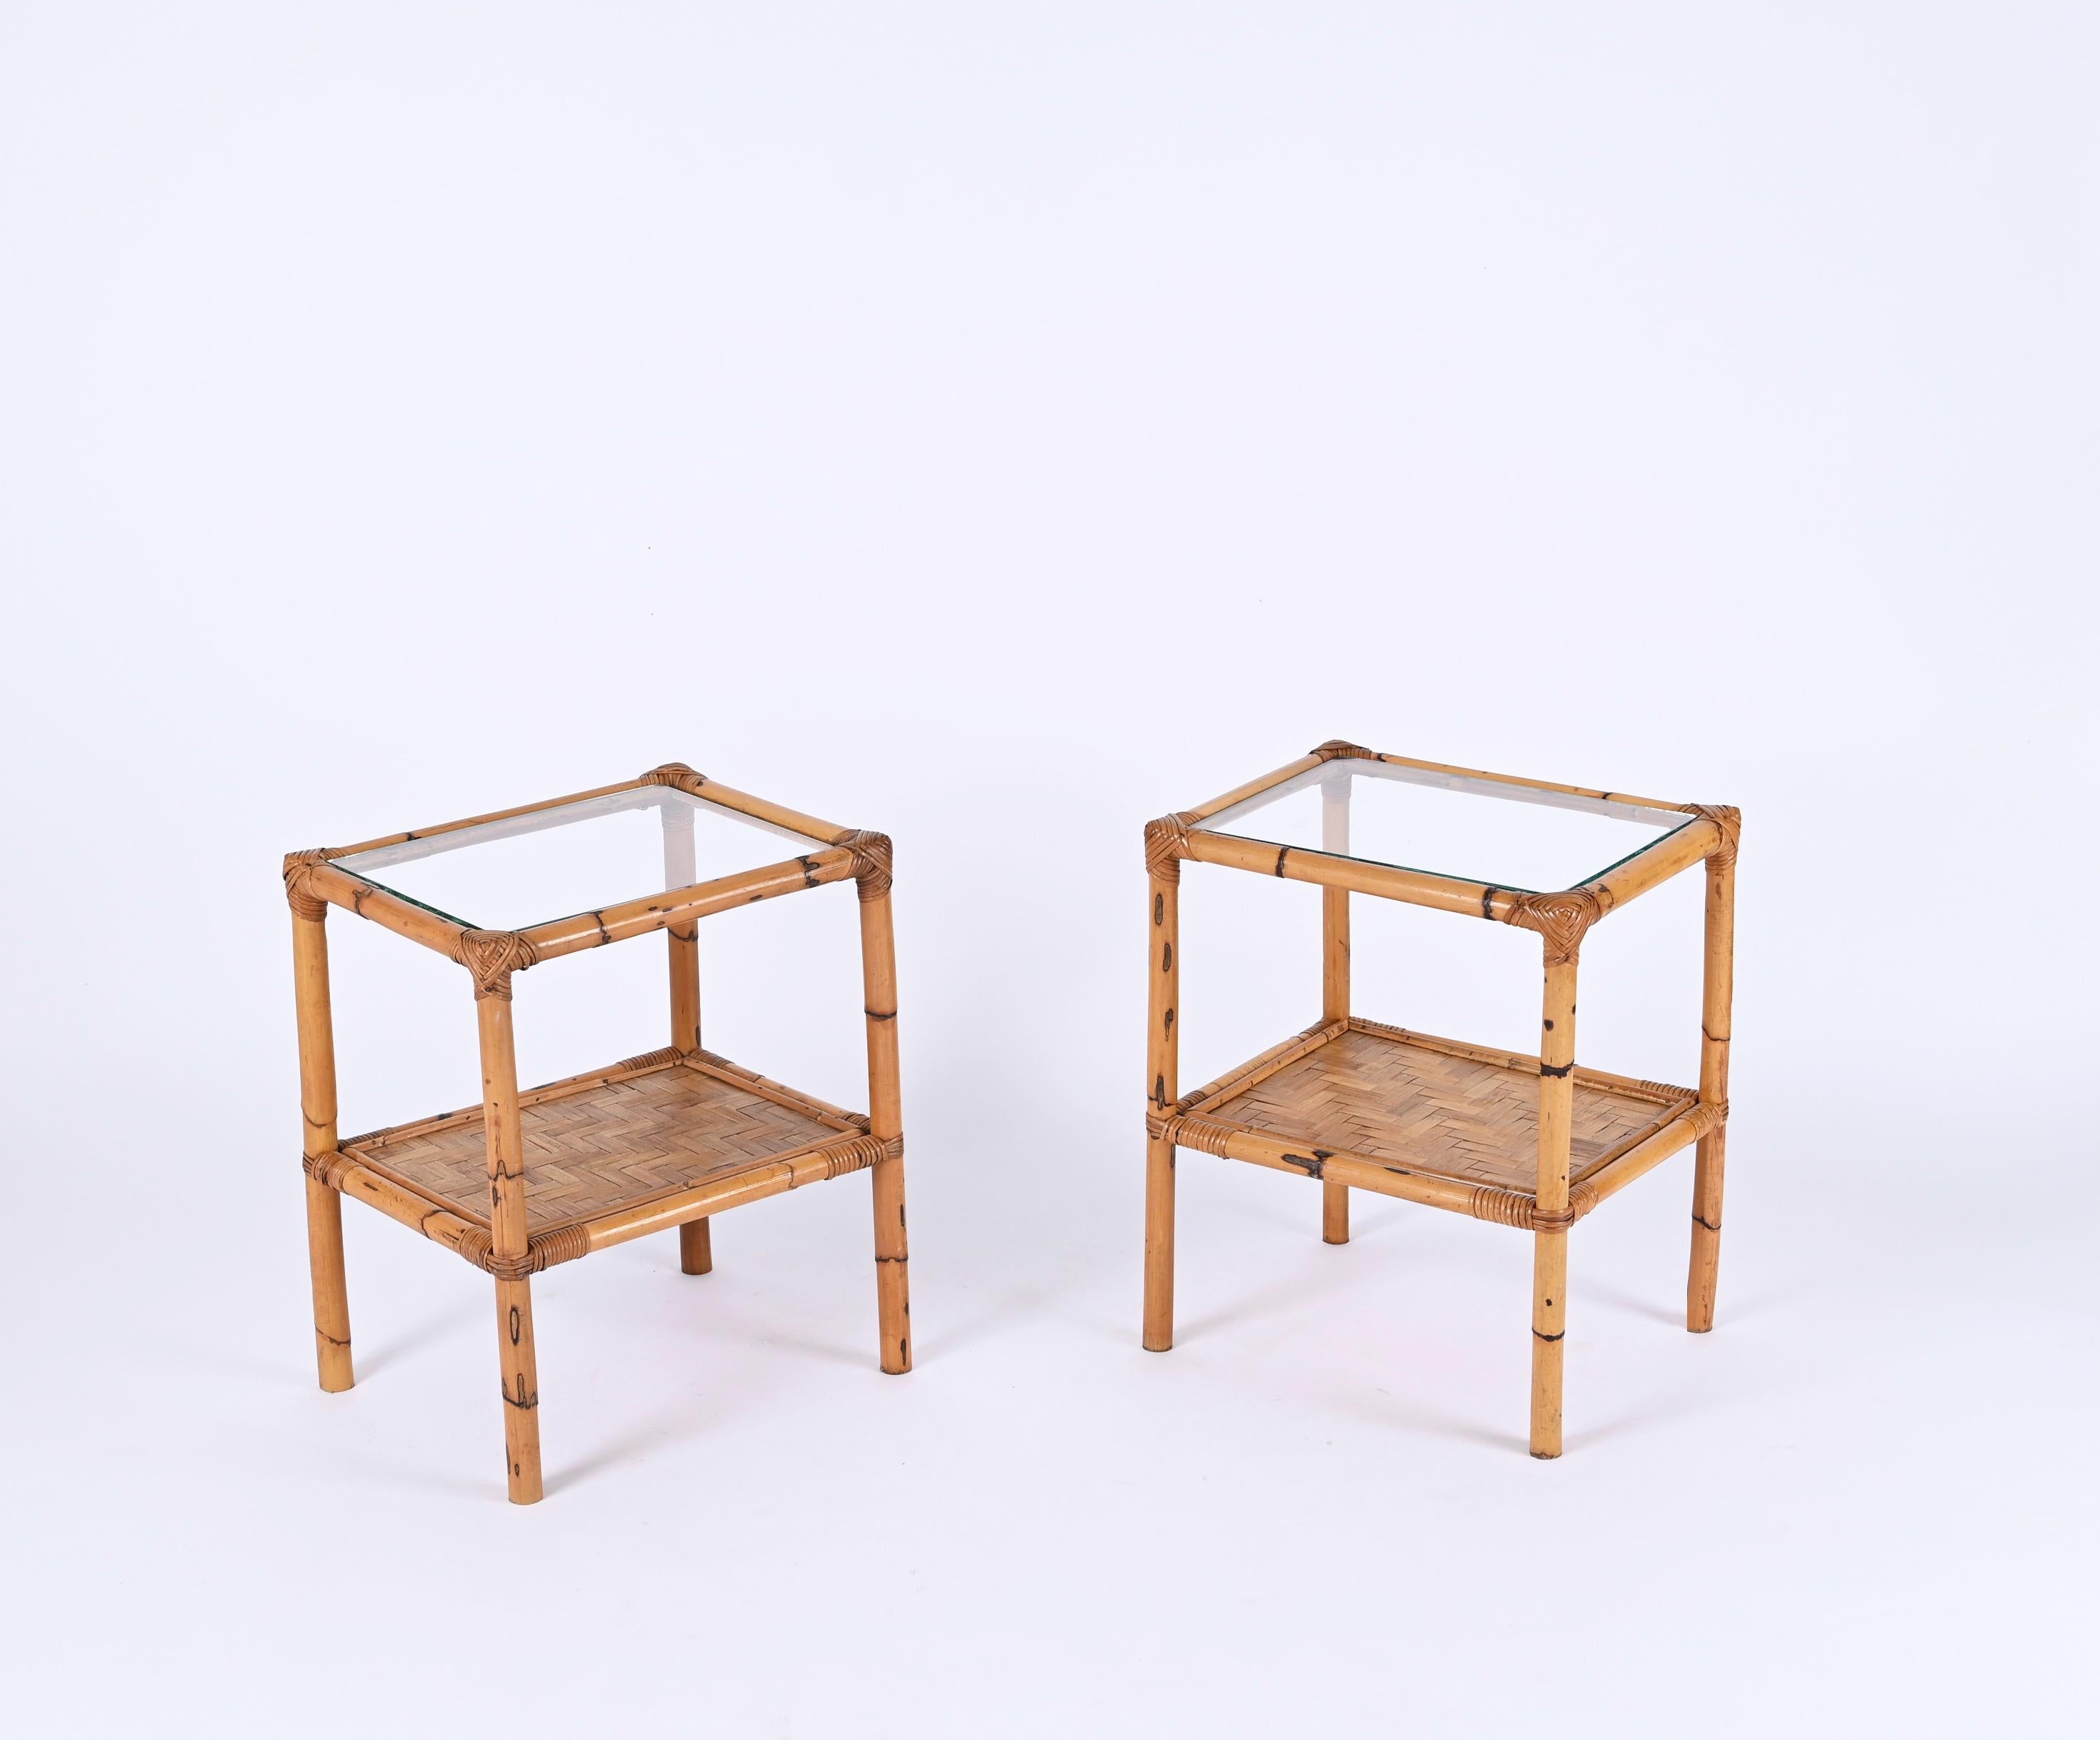 Pair of Mid-Century Italian Bedside Tables in Bamboo, Rattan and Glass, 1970s For Sale 3